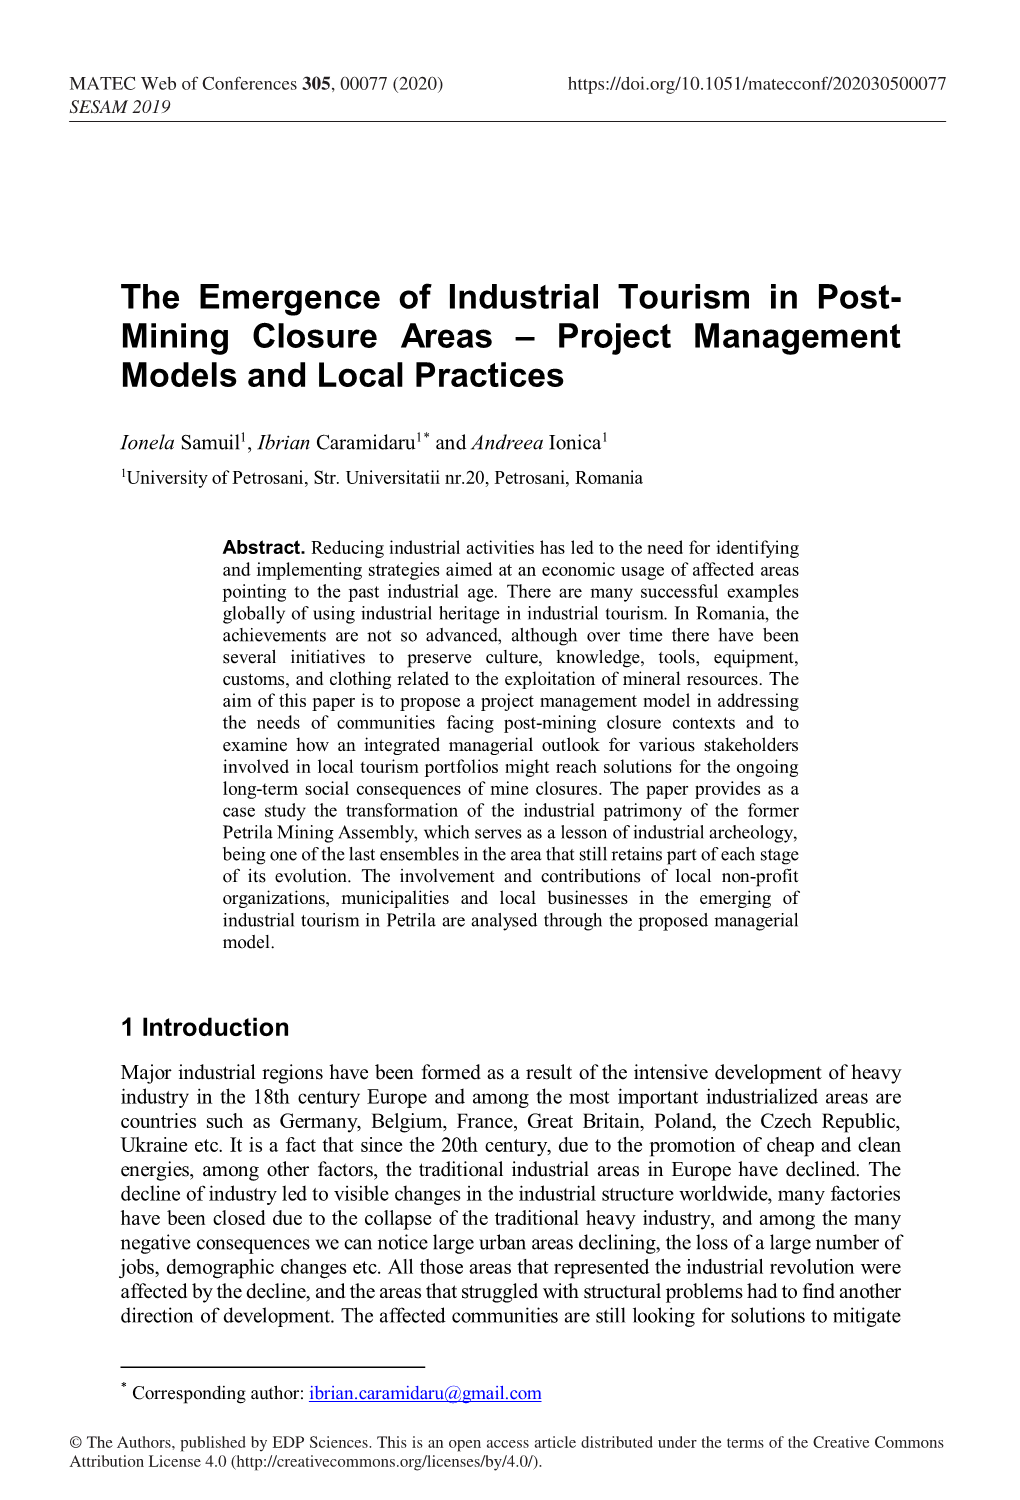 The Emergence of Industrial Tourism in Post-Mining Closure Areas – Project Management Models and Local Practices